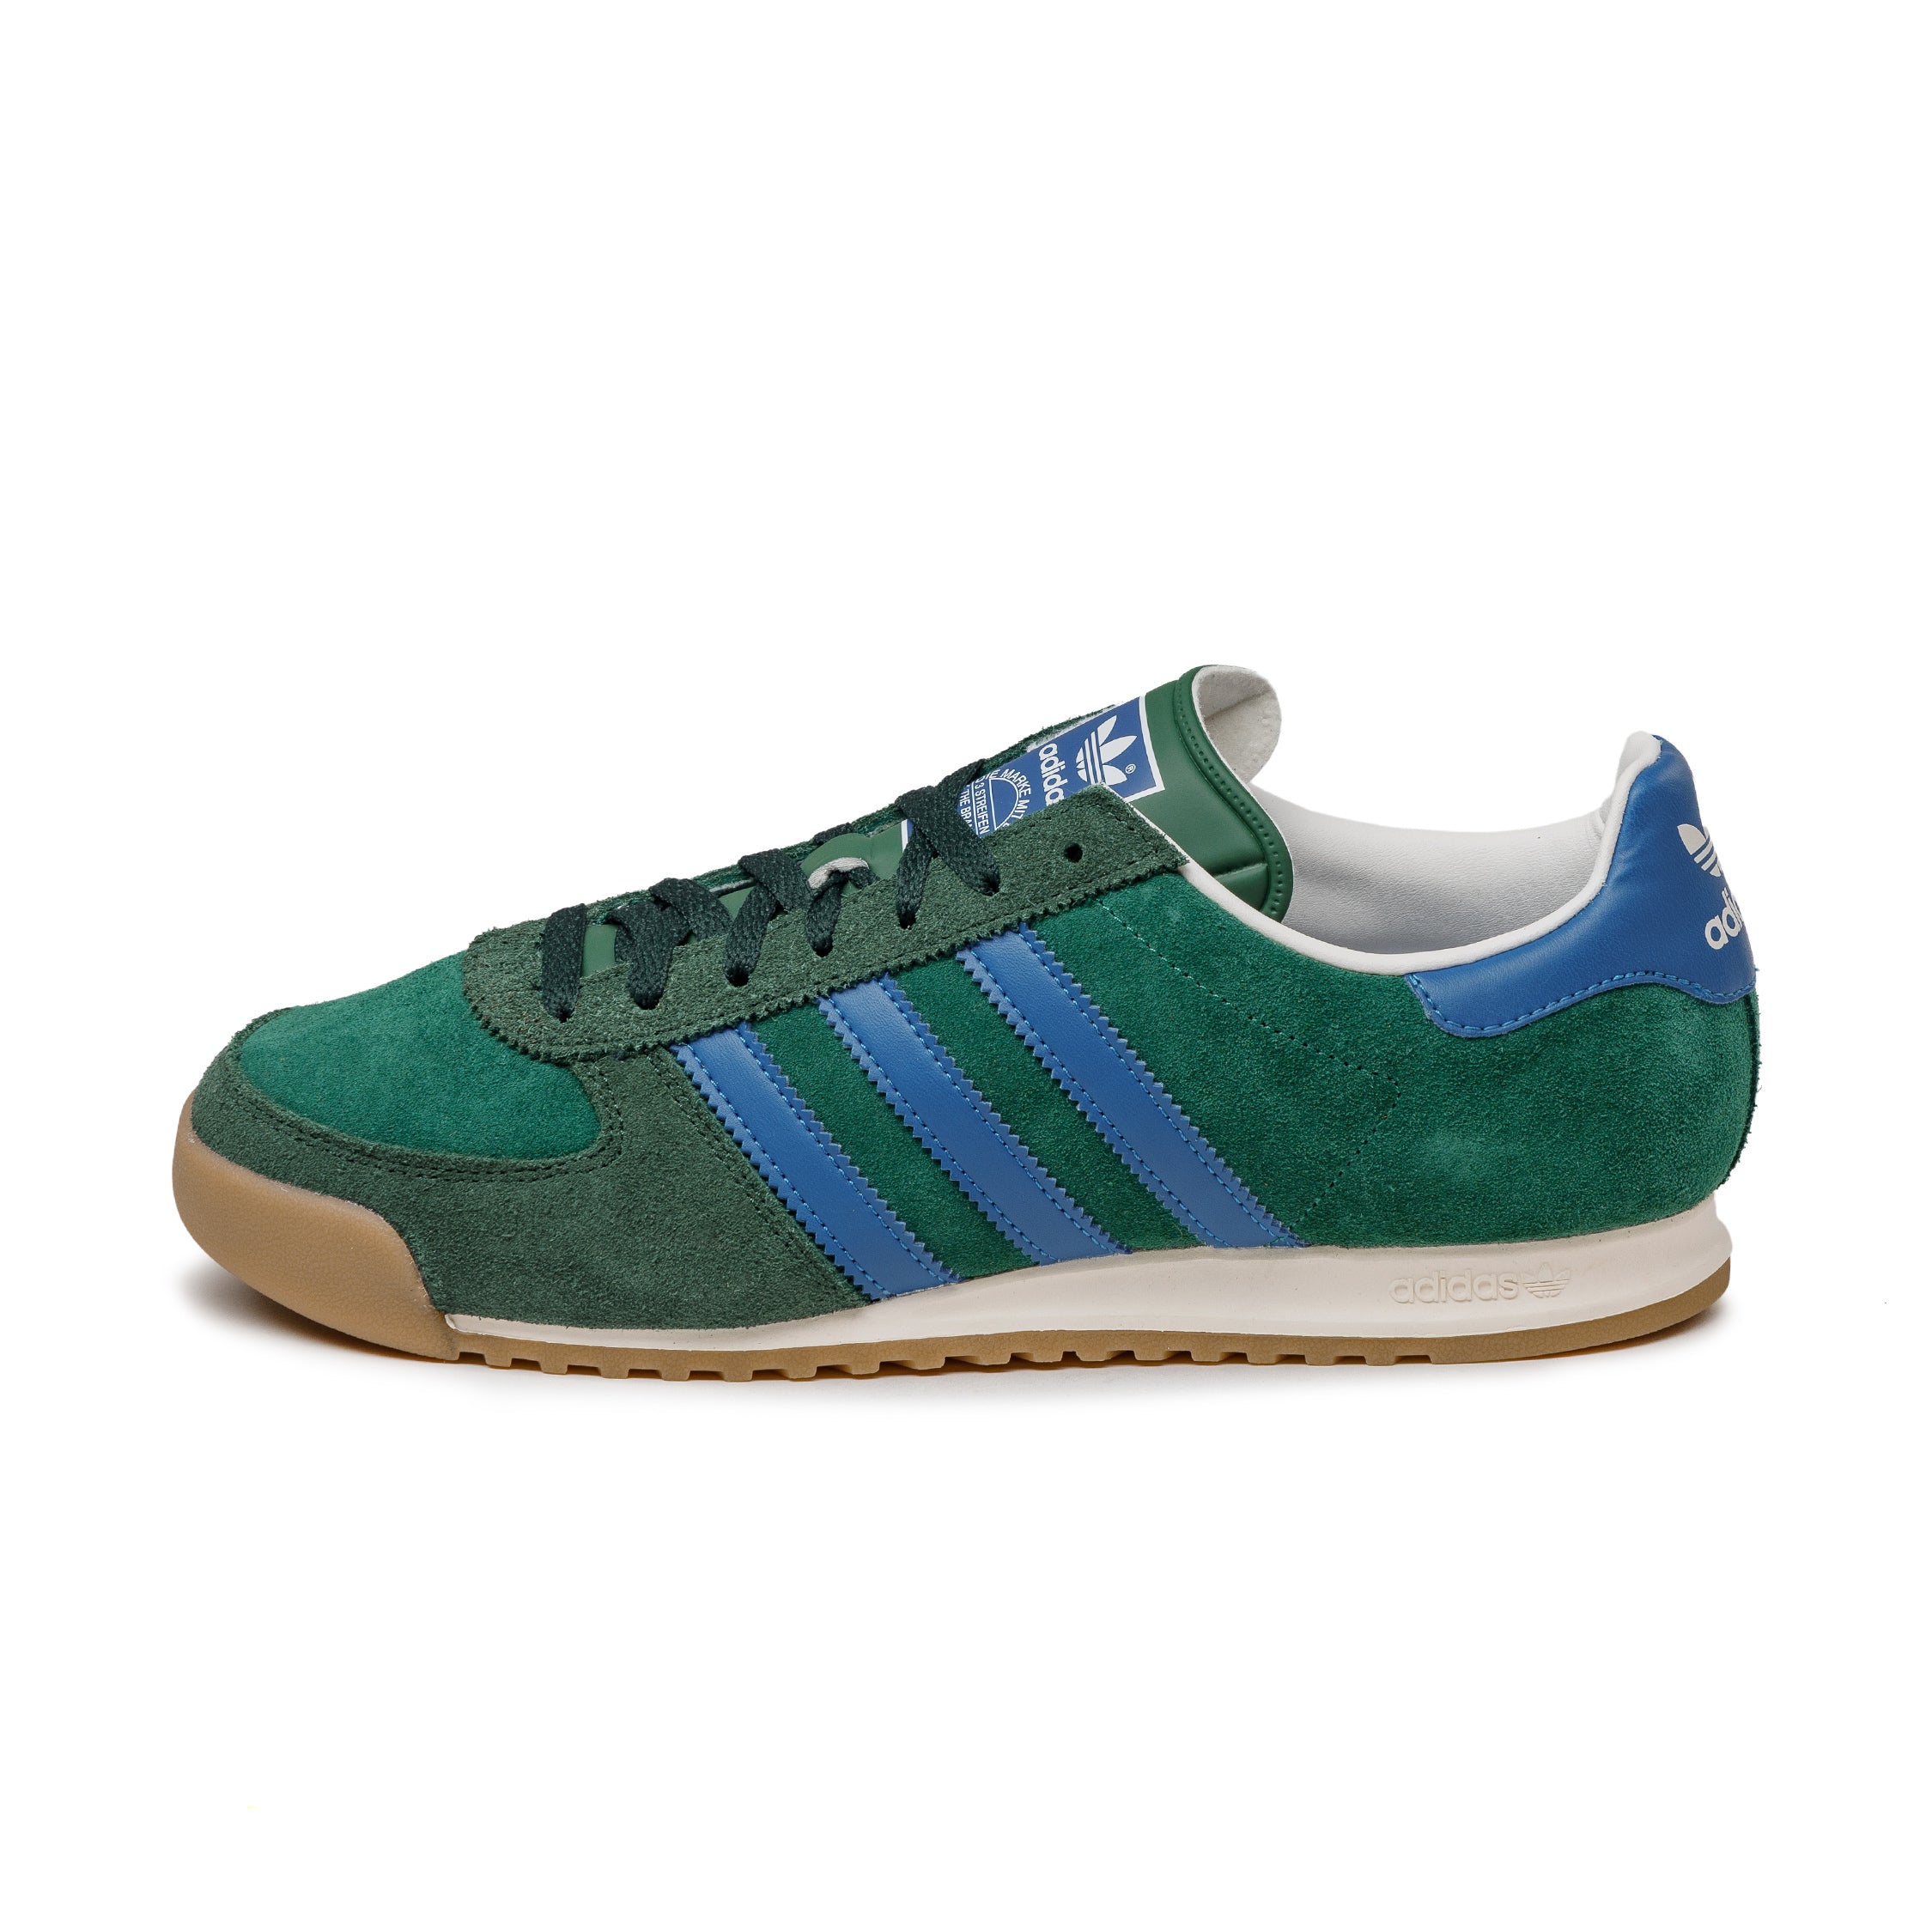 Adidas Allteam – buy now at Asphaltgold Online Store!